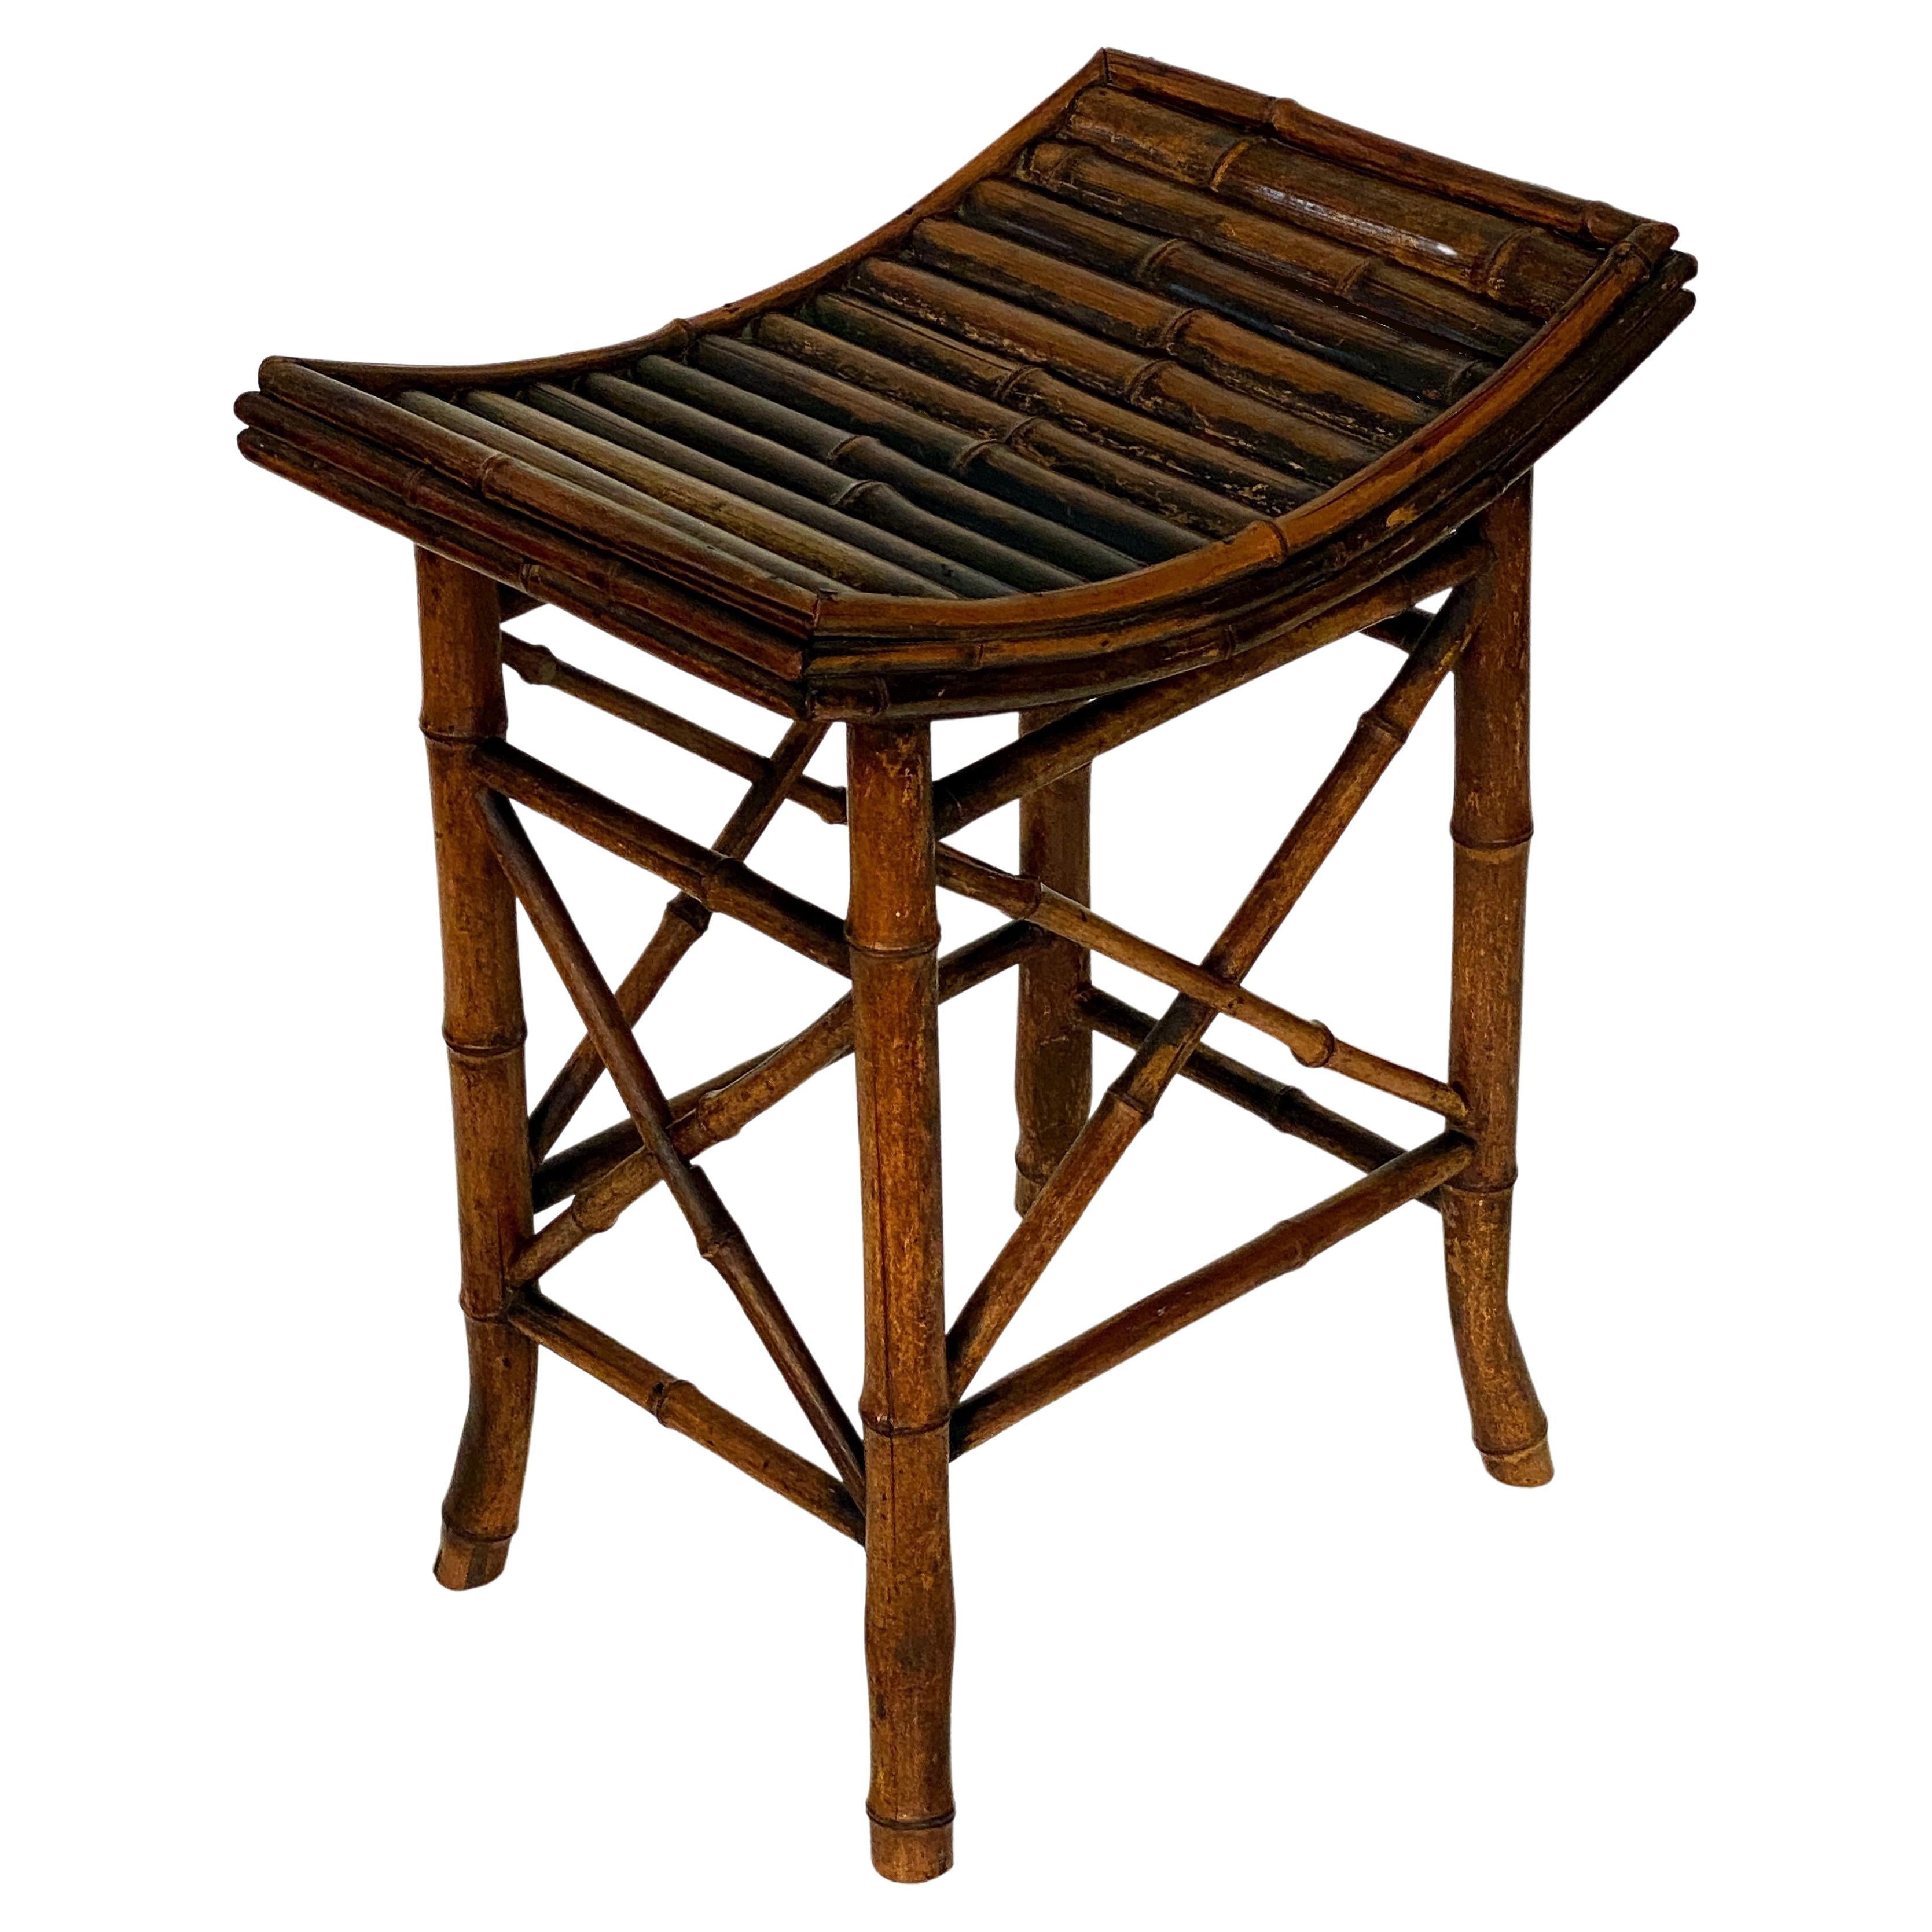 English Bamboo Bench or Stool with Saddle Seat from the Aesthetic Movement Era For Sale